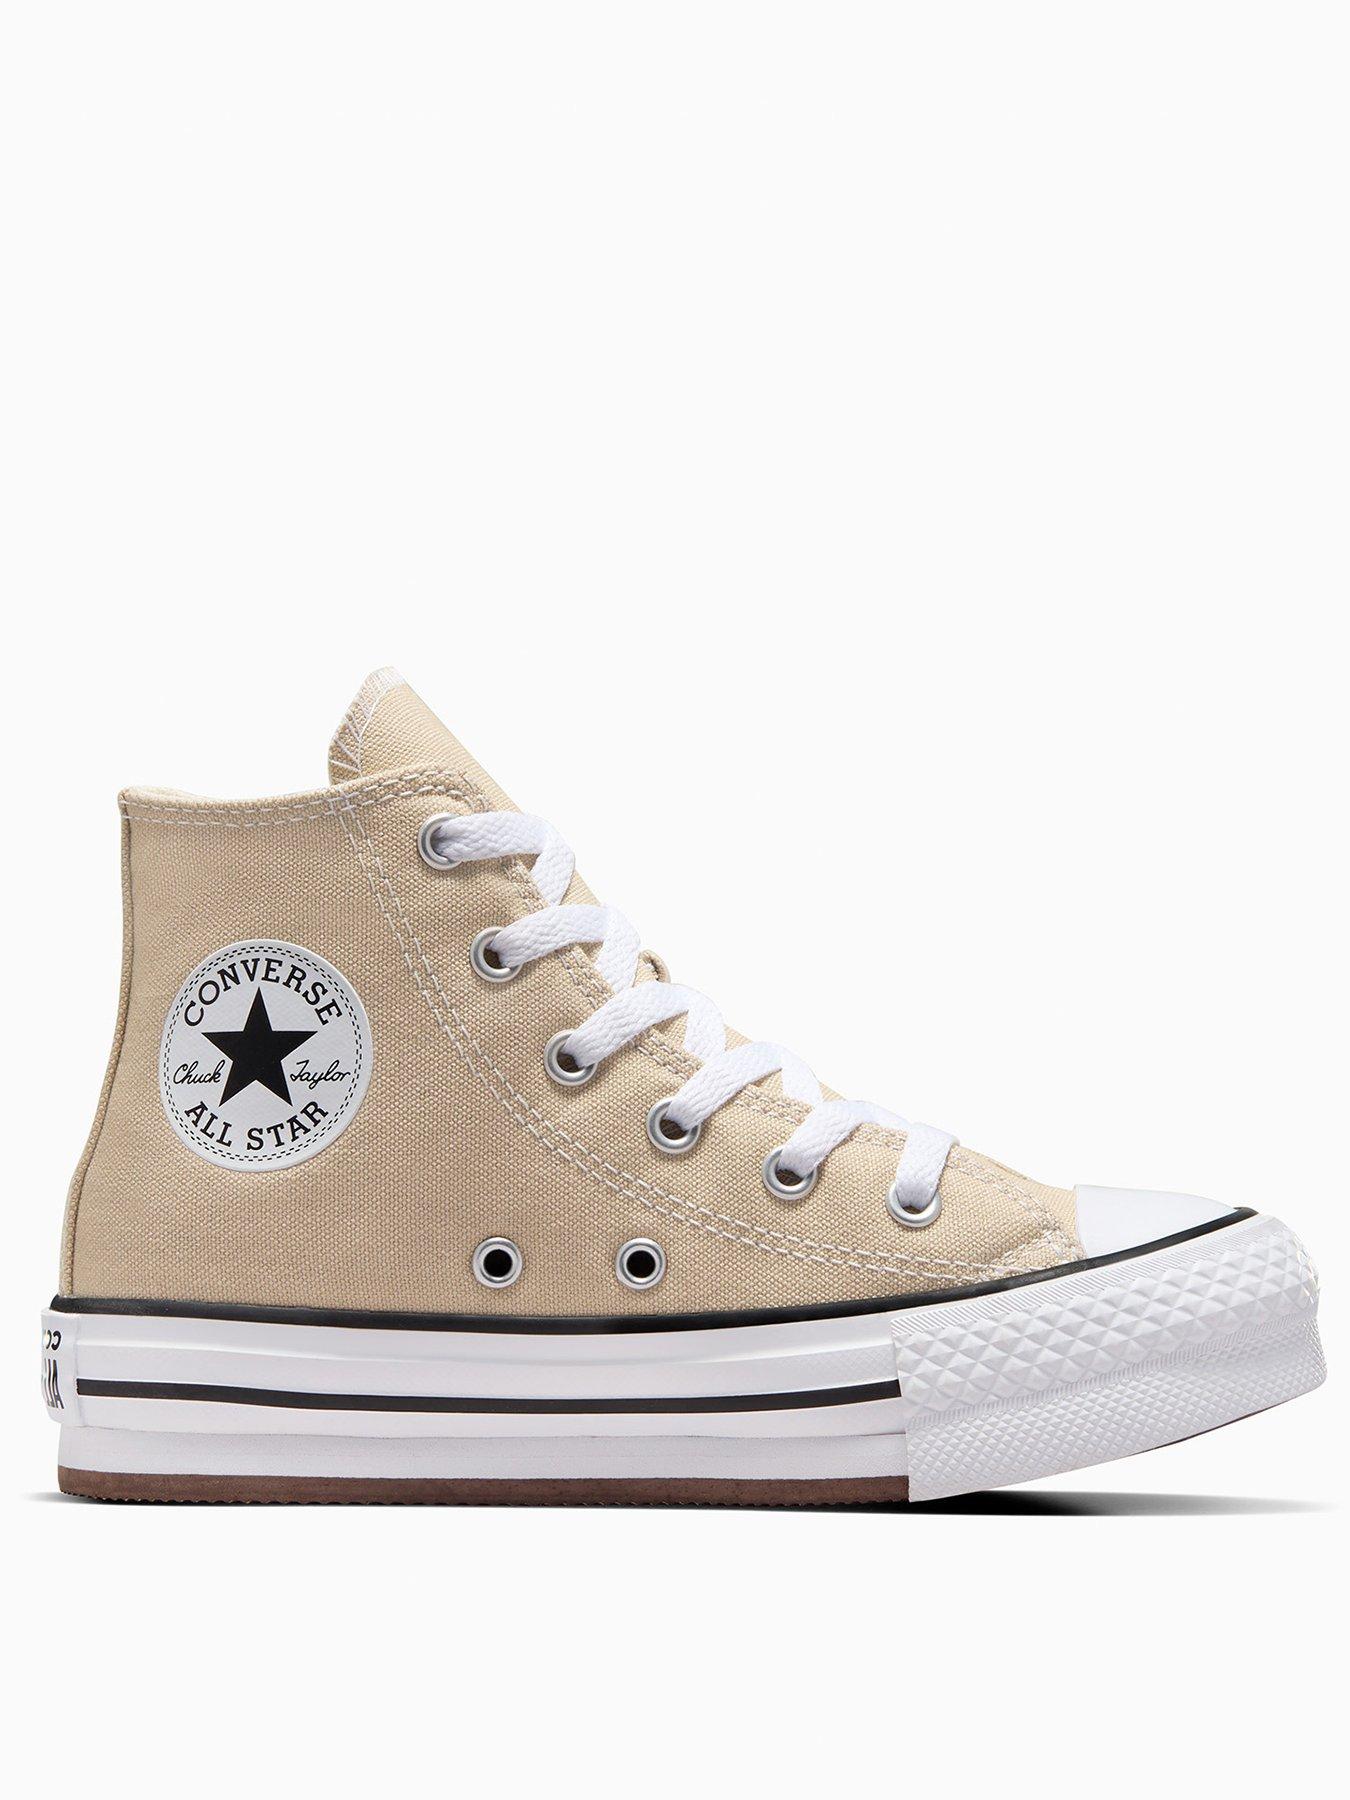 Converse Girls EVA Lift Hi Top Trainers - Light Brown, Light Brown, Size 10.5 Younger